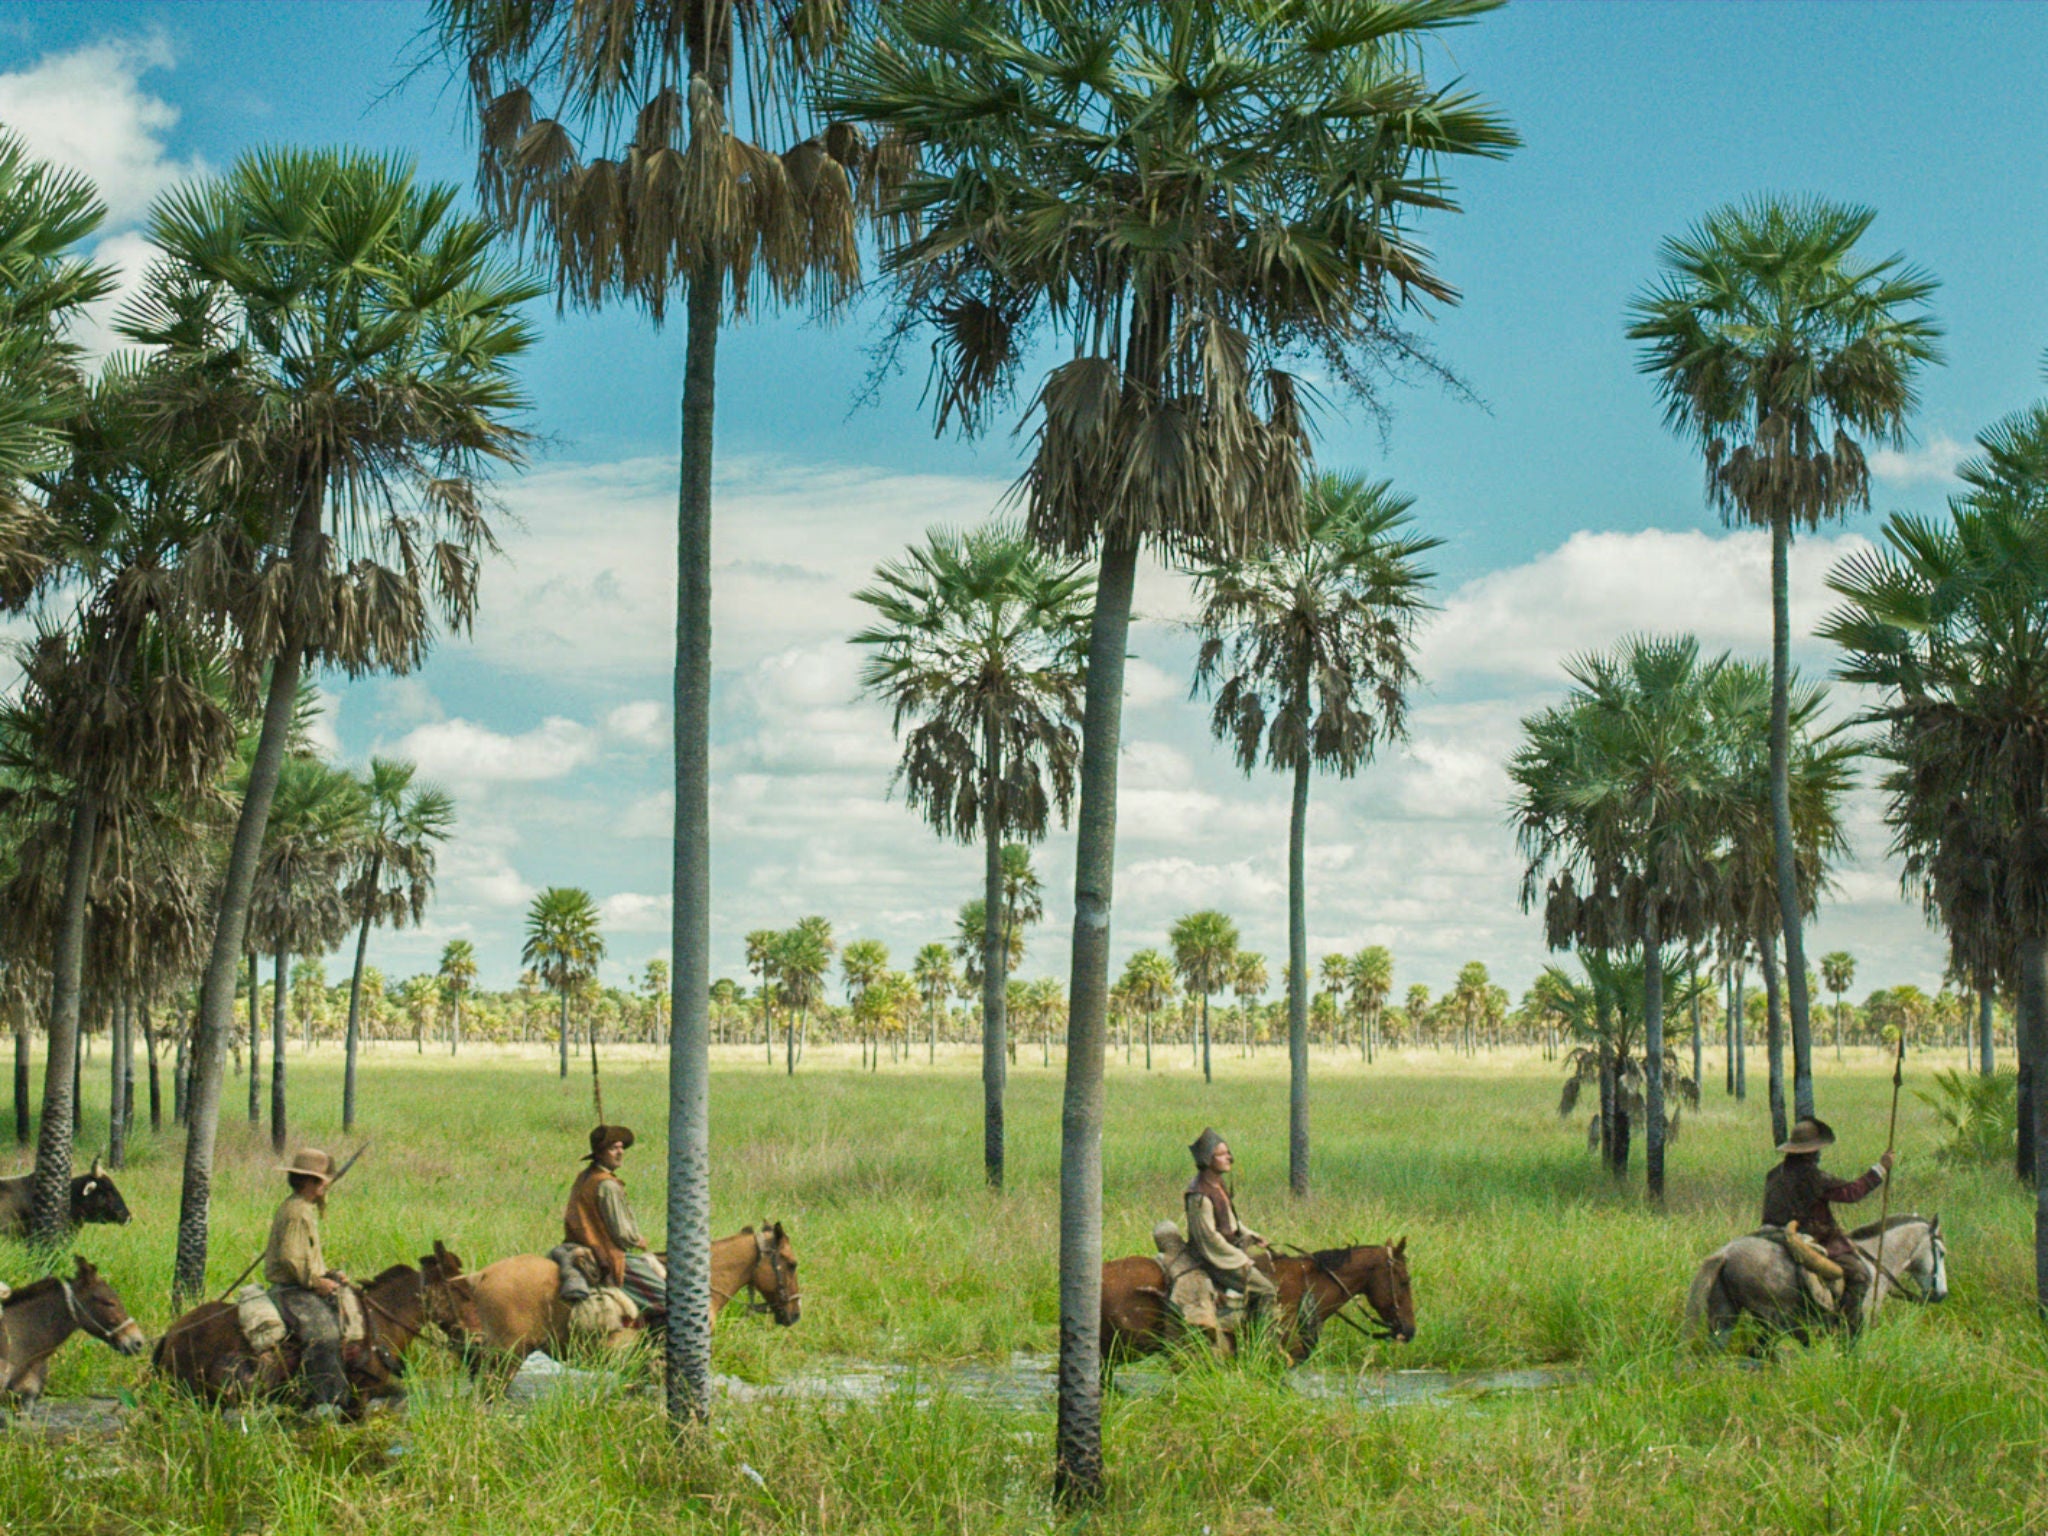 Lucrecia Martel’s ‘Zama’ is one of the films shaking up the genre